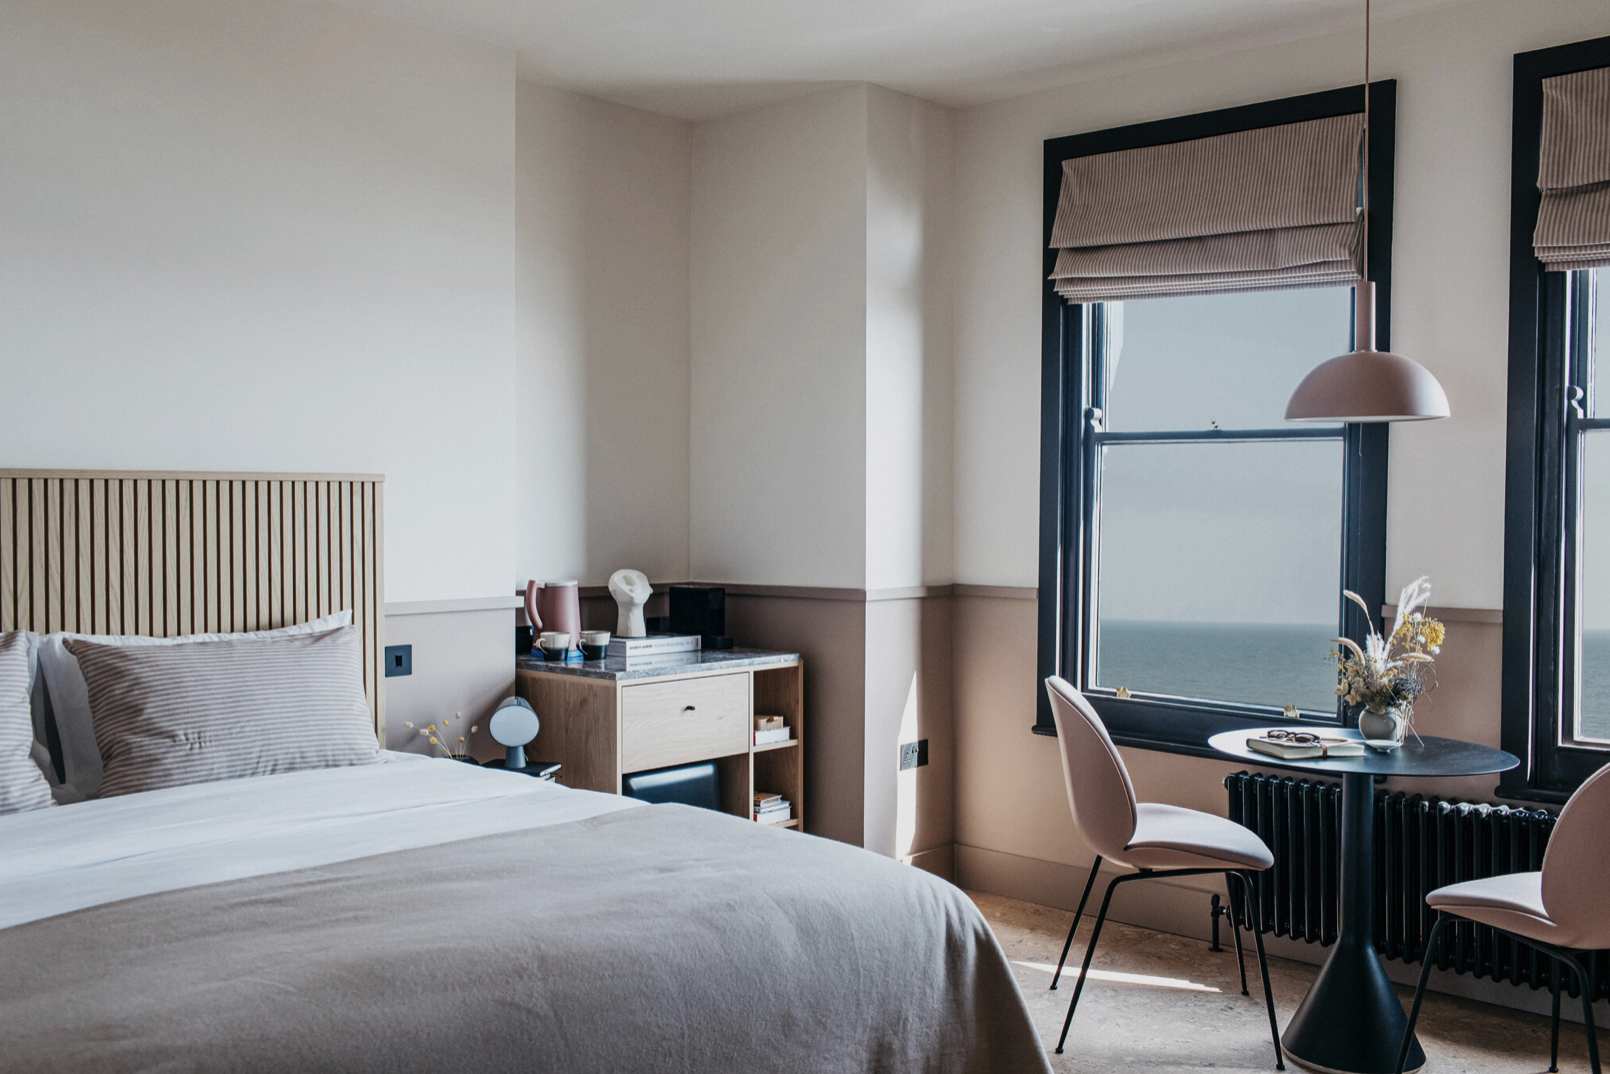 A modern hotel room with a view of the sea